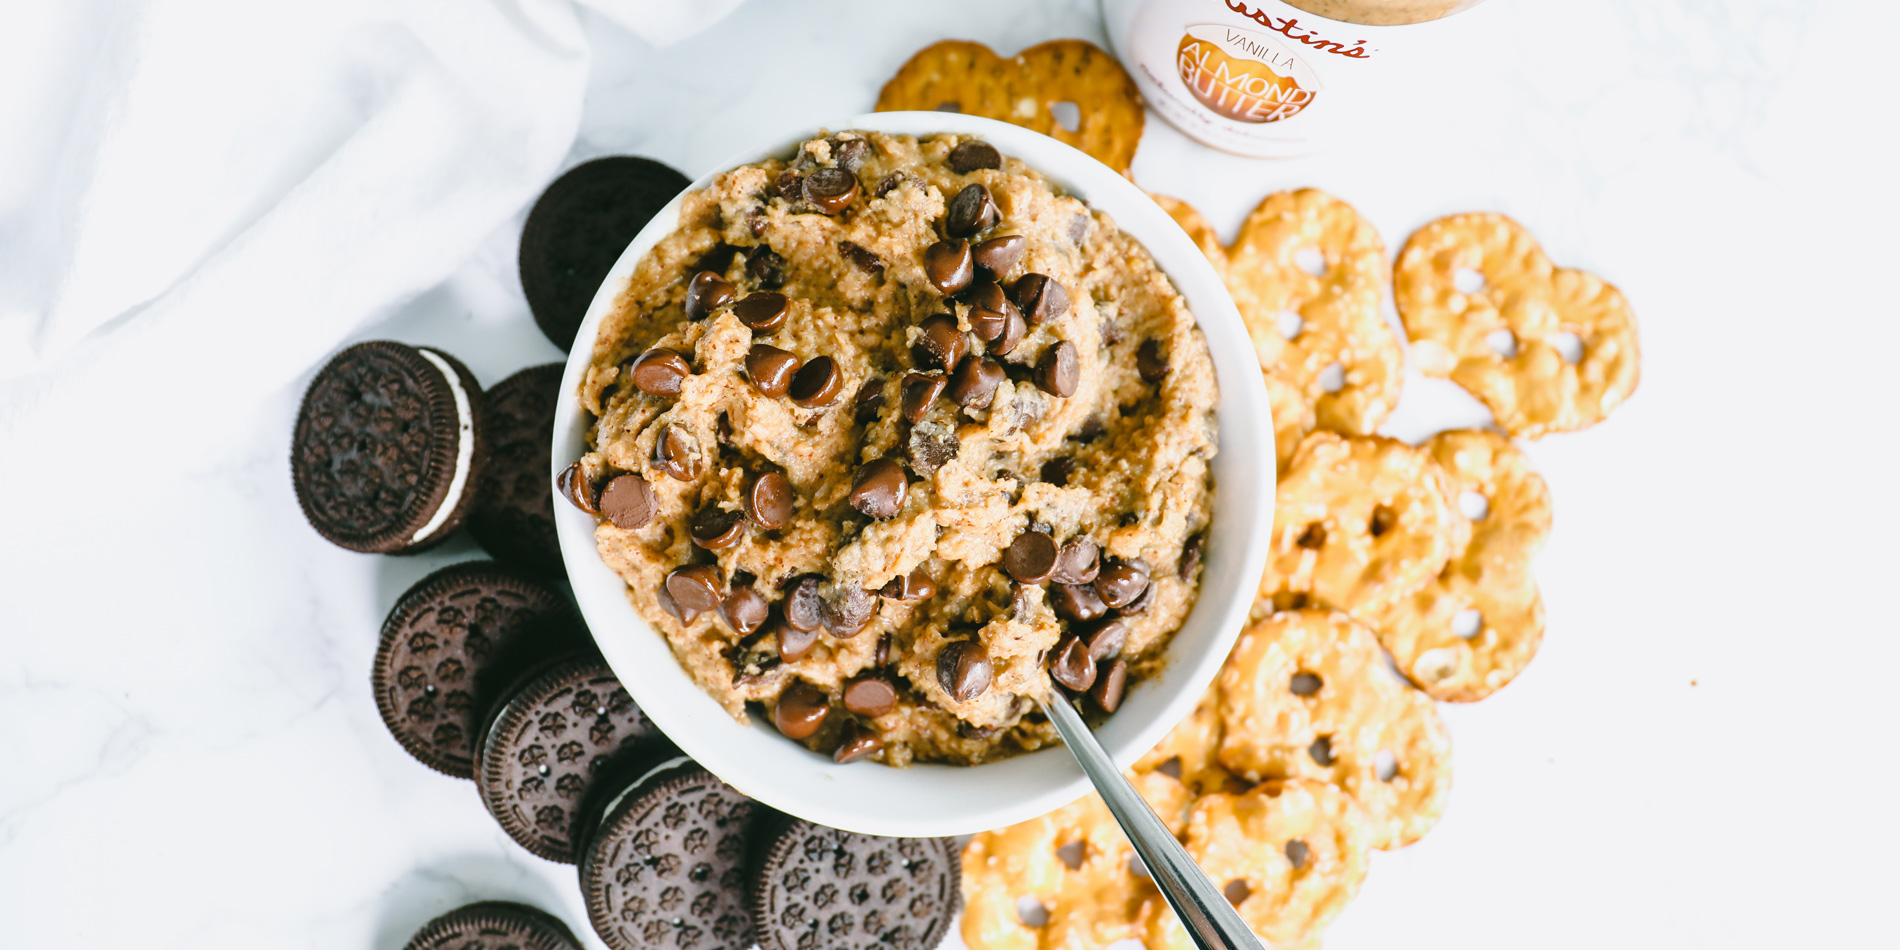 Gluten-Free Chocolate Chip Cookie Dough Dip in a bowl with cream chocolate cookies and salted pretzels scattered underneath